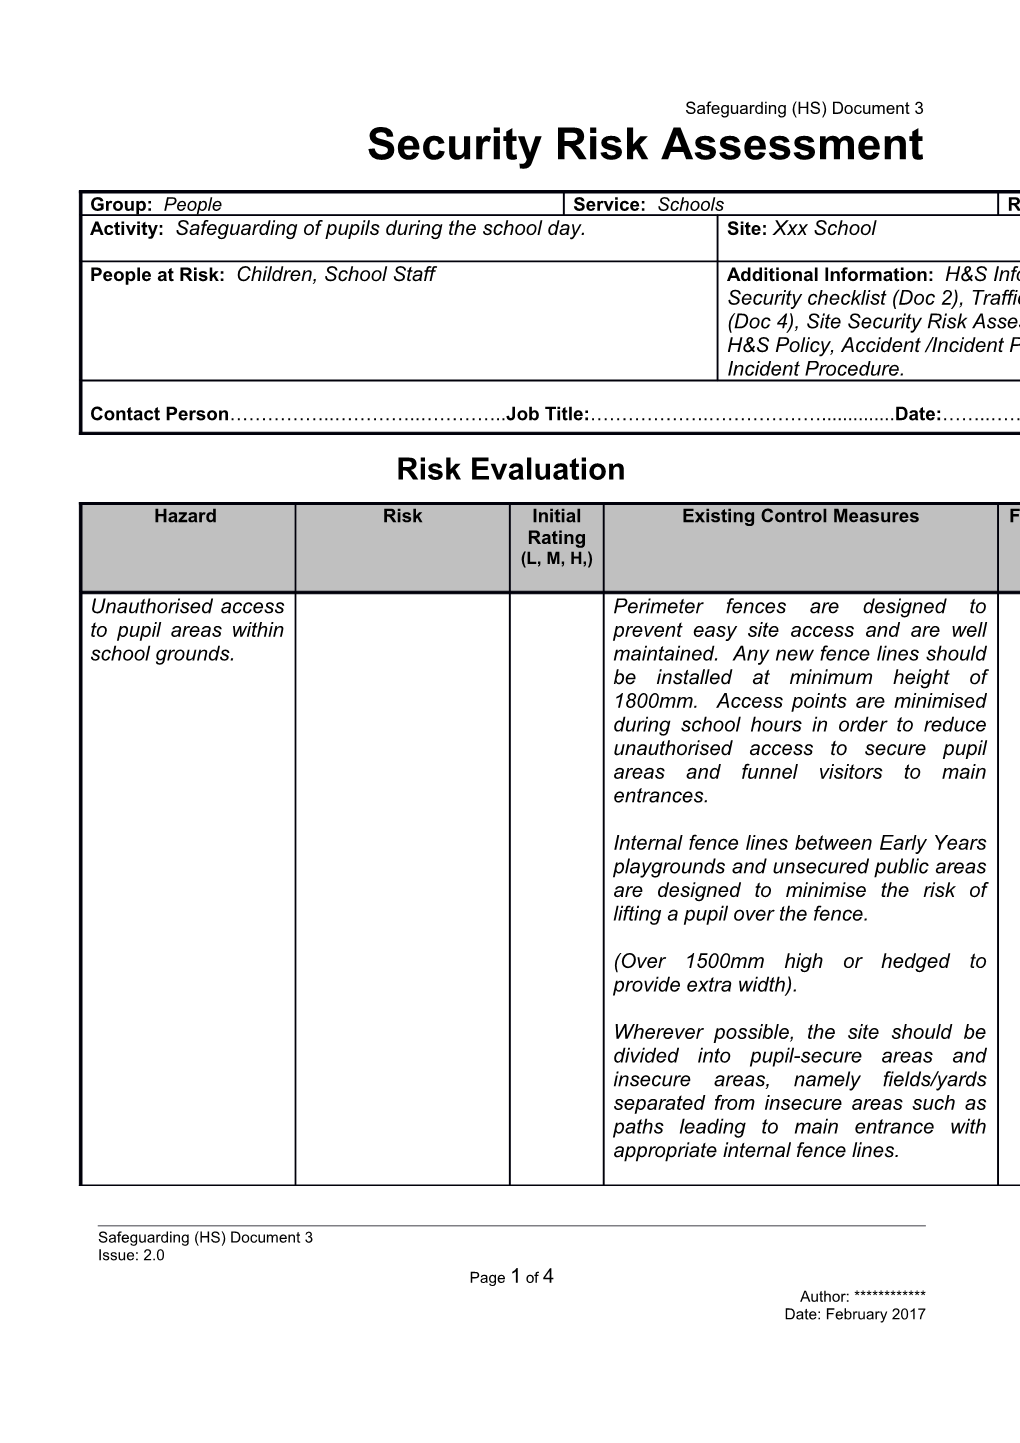 Document 3 - Security Risk Assessment